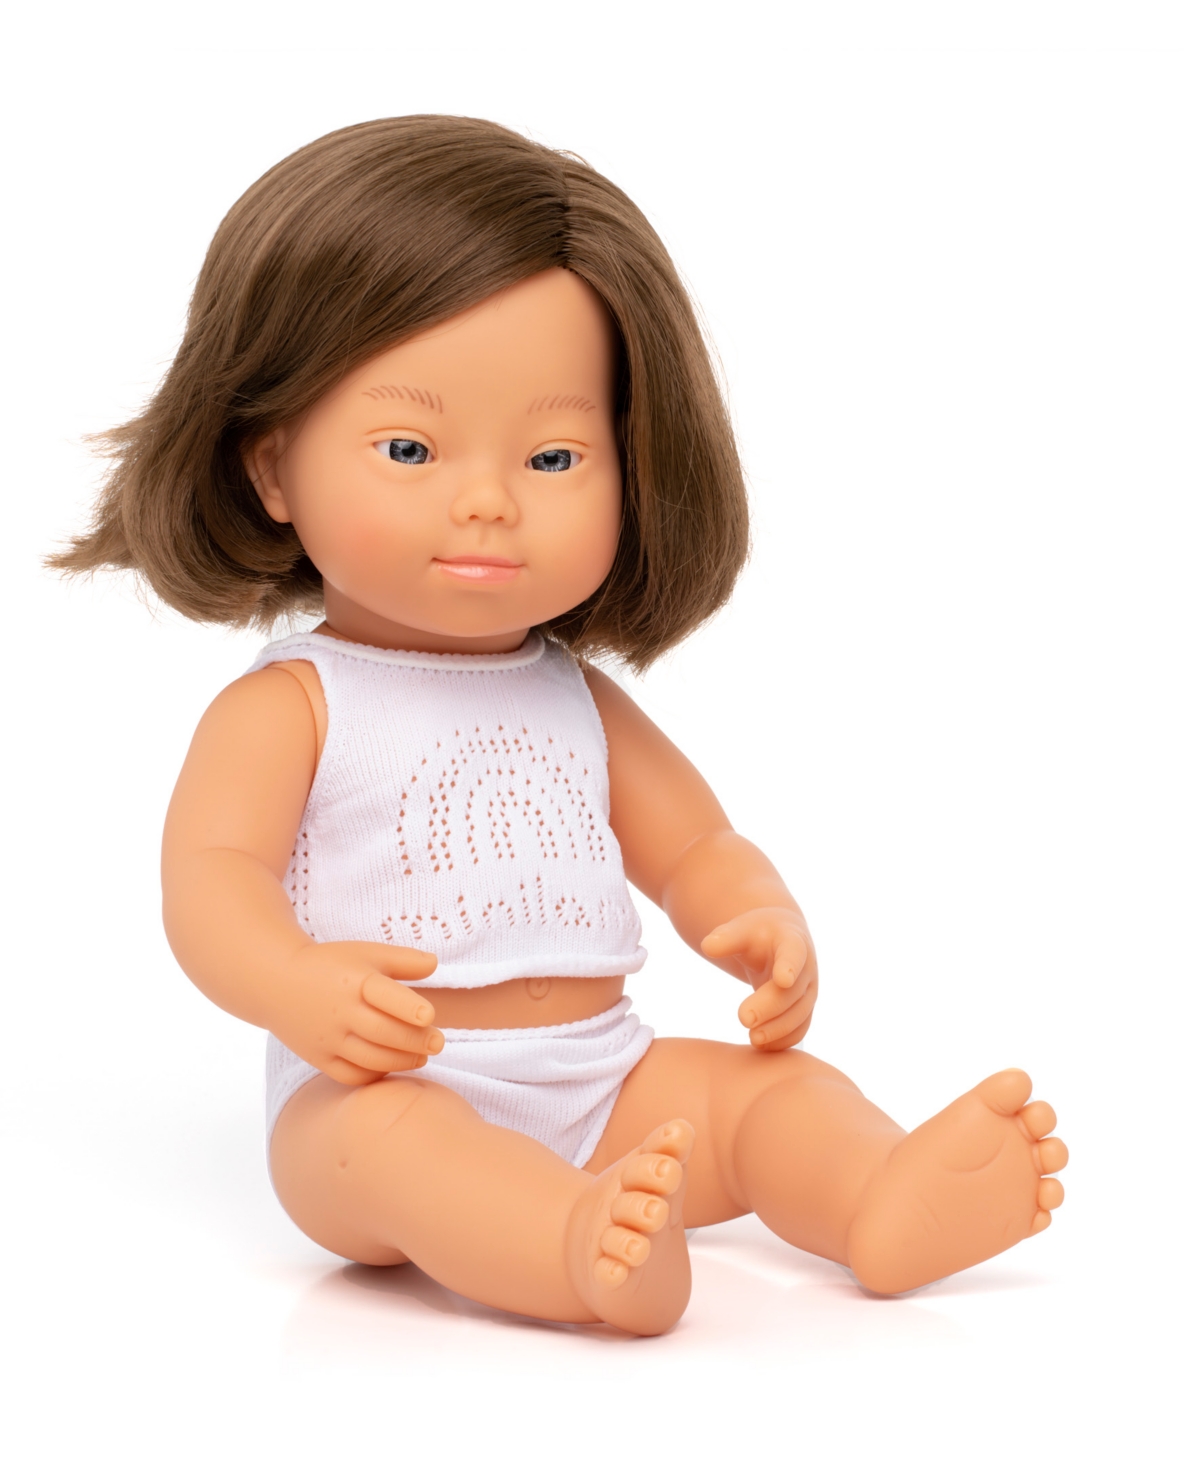 Miniland 15" Baby Doll Caucasian Girl With Down Syndrome Set , 3 Piece In No Color